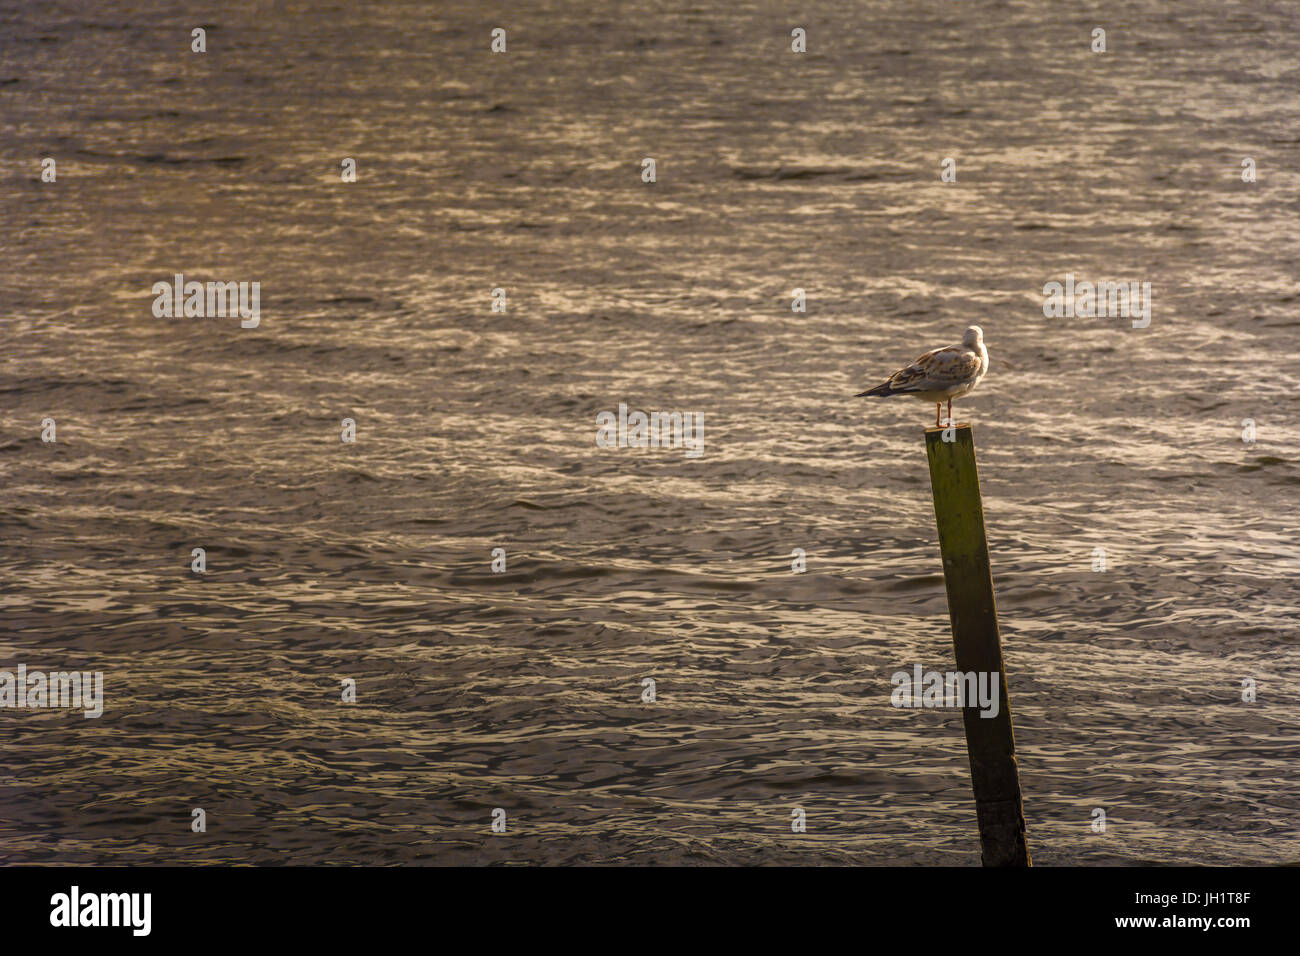 isolated gull stood on post in lake Stock Photo